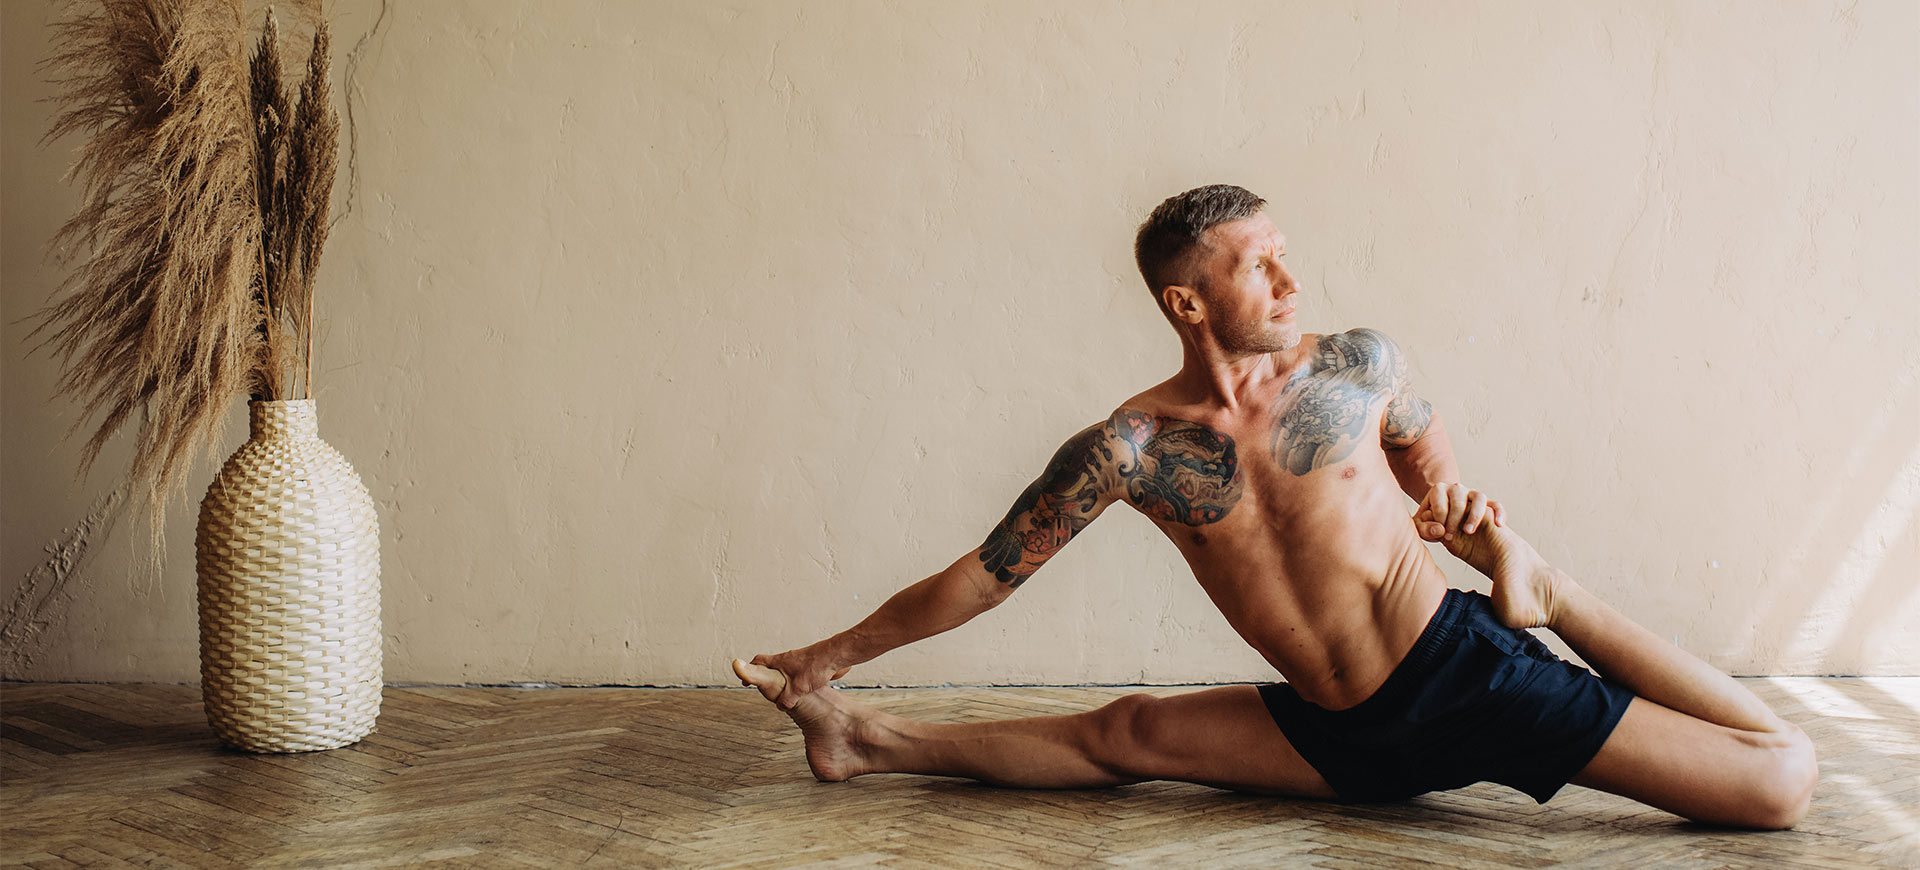 Yoga for Everyone: Making Men Feel More Included - Momoyoga